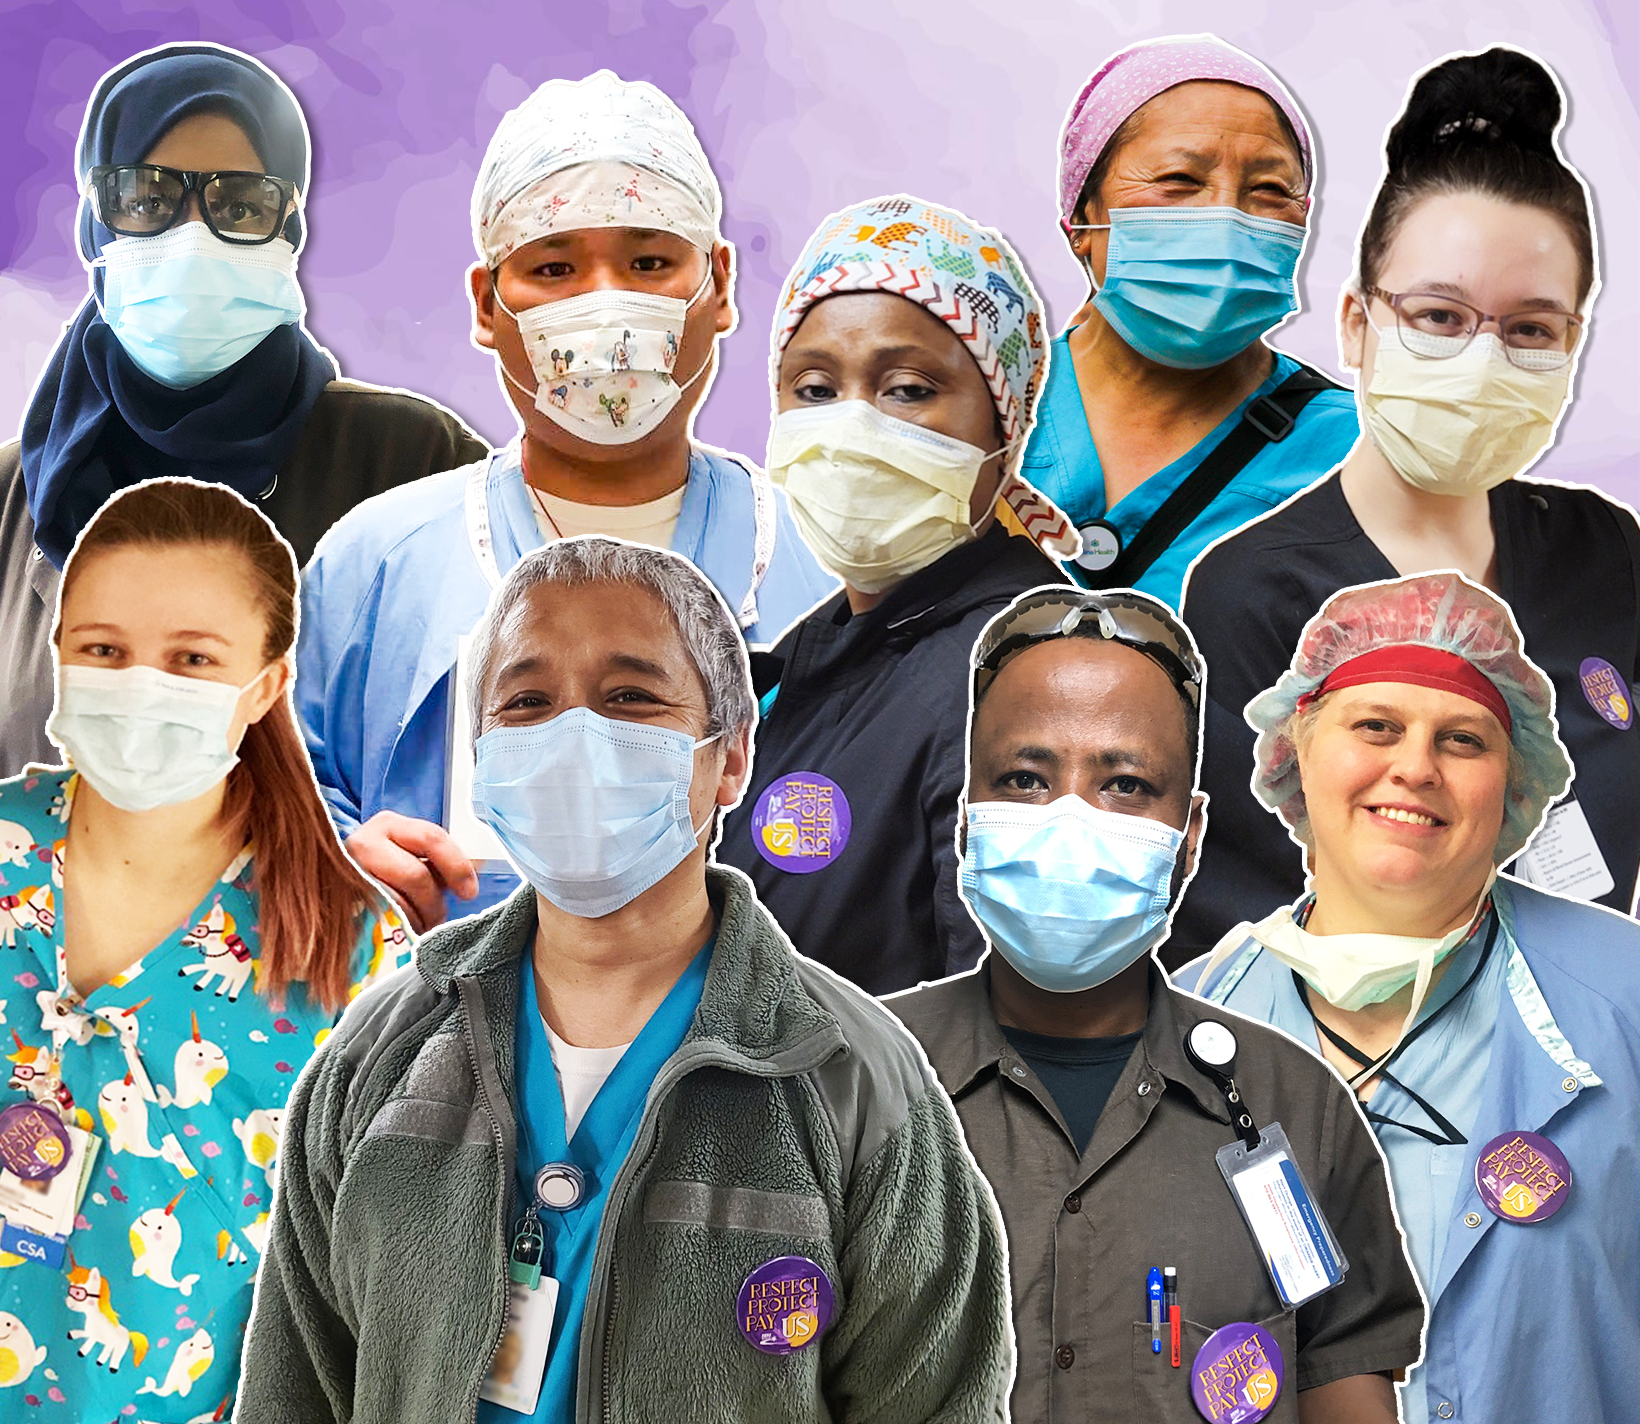 Health care workers of varying ethnicities, all wearing SEIU badges.